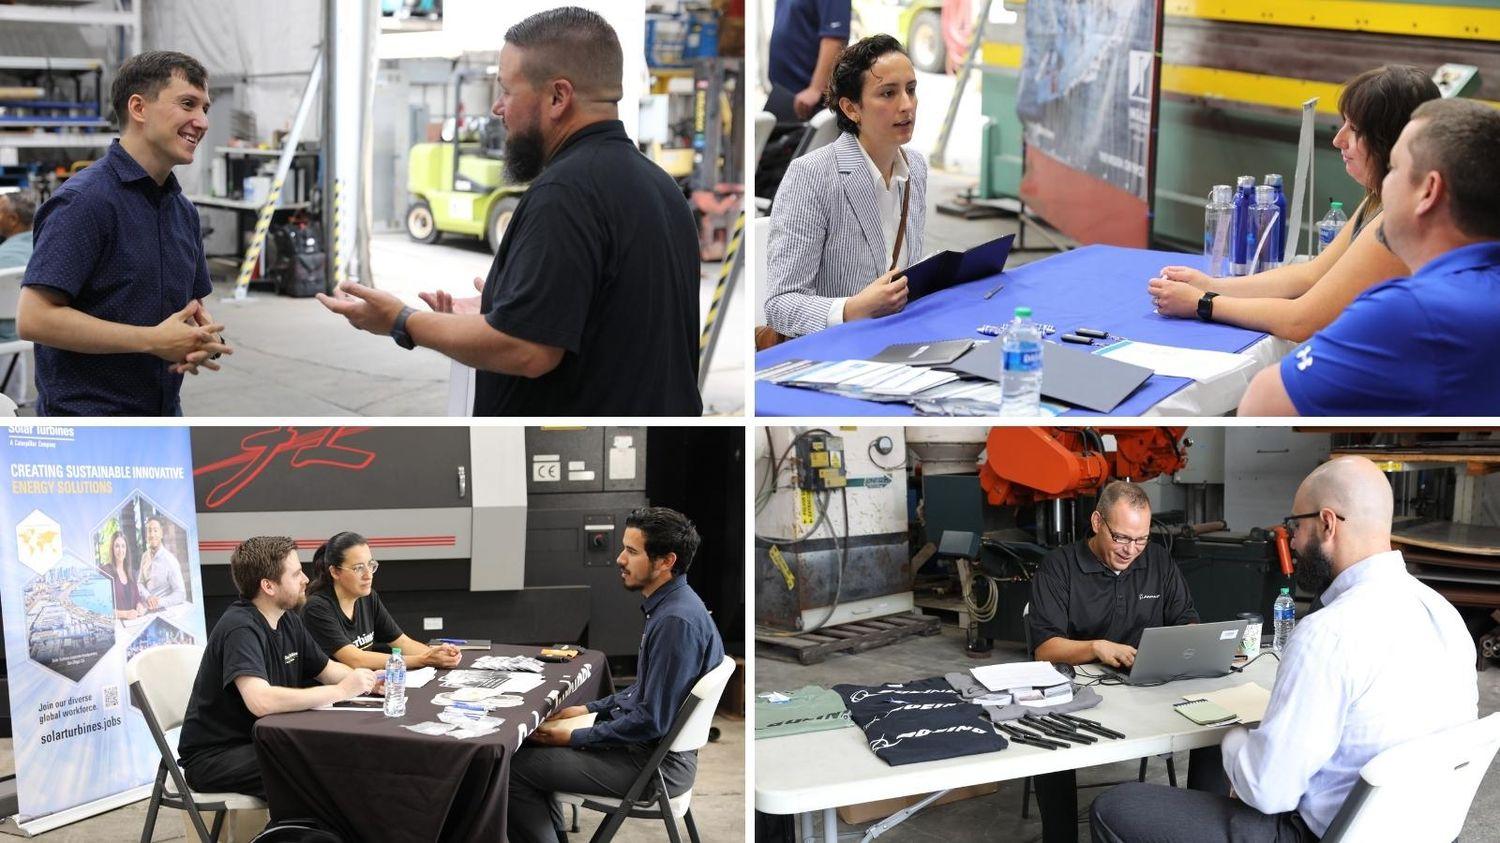 Workshops for Warriors corporate partners at WFW employer career fair